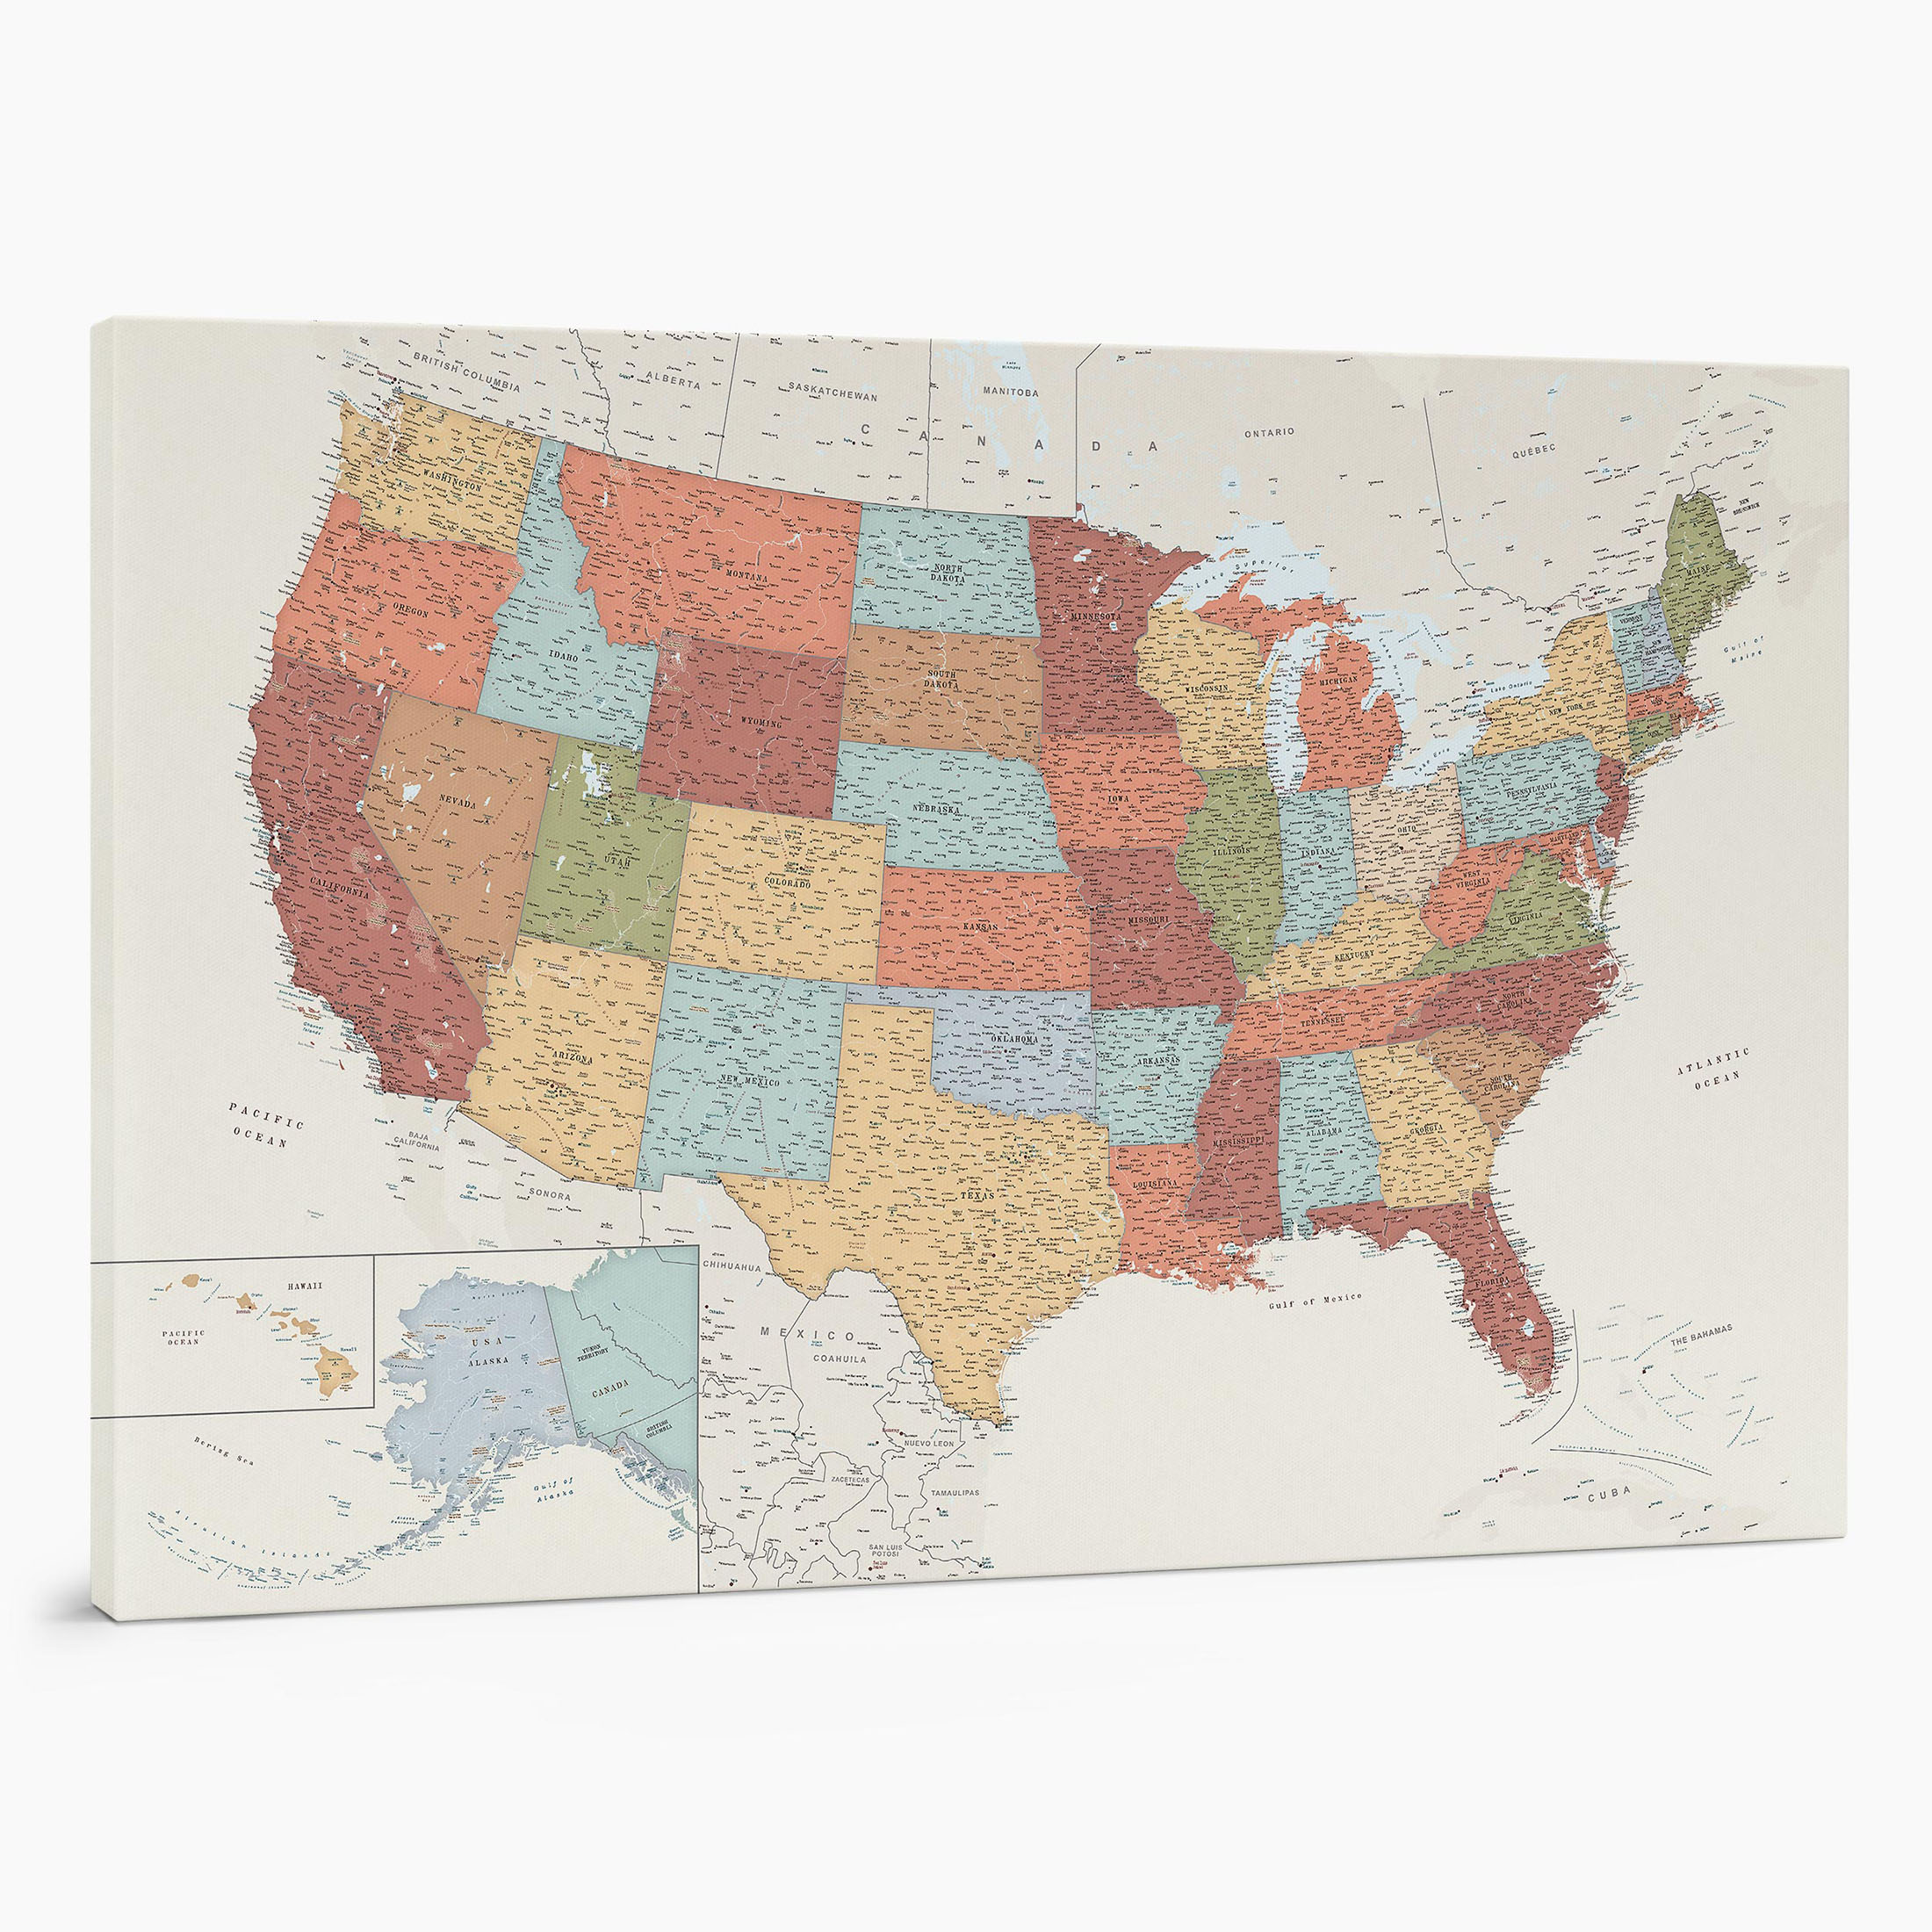 4USA large push pin usa map on canvas to mark visited places colorful